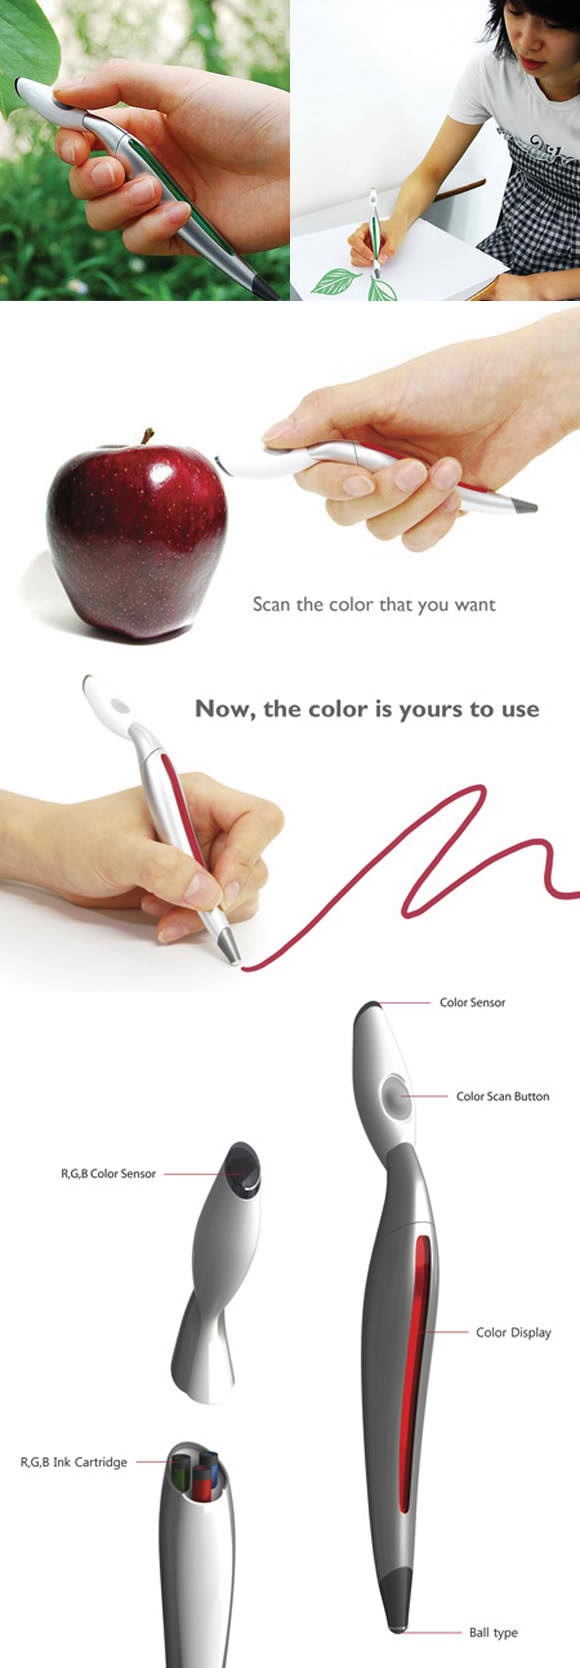 color picker pen - Scan the color that you want Now, the color is yours to use Color Sensor Color Scan Button Rgb Color Sensor Color Display R.G,B Ink Cartridge Ball type